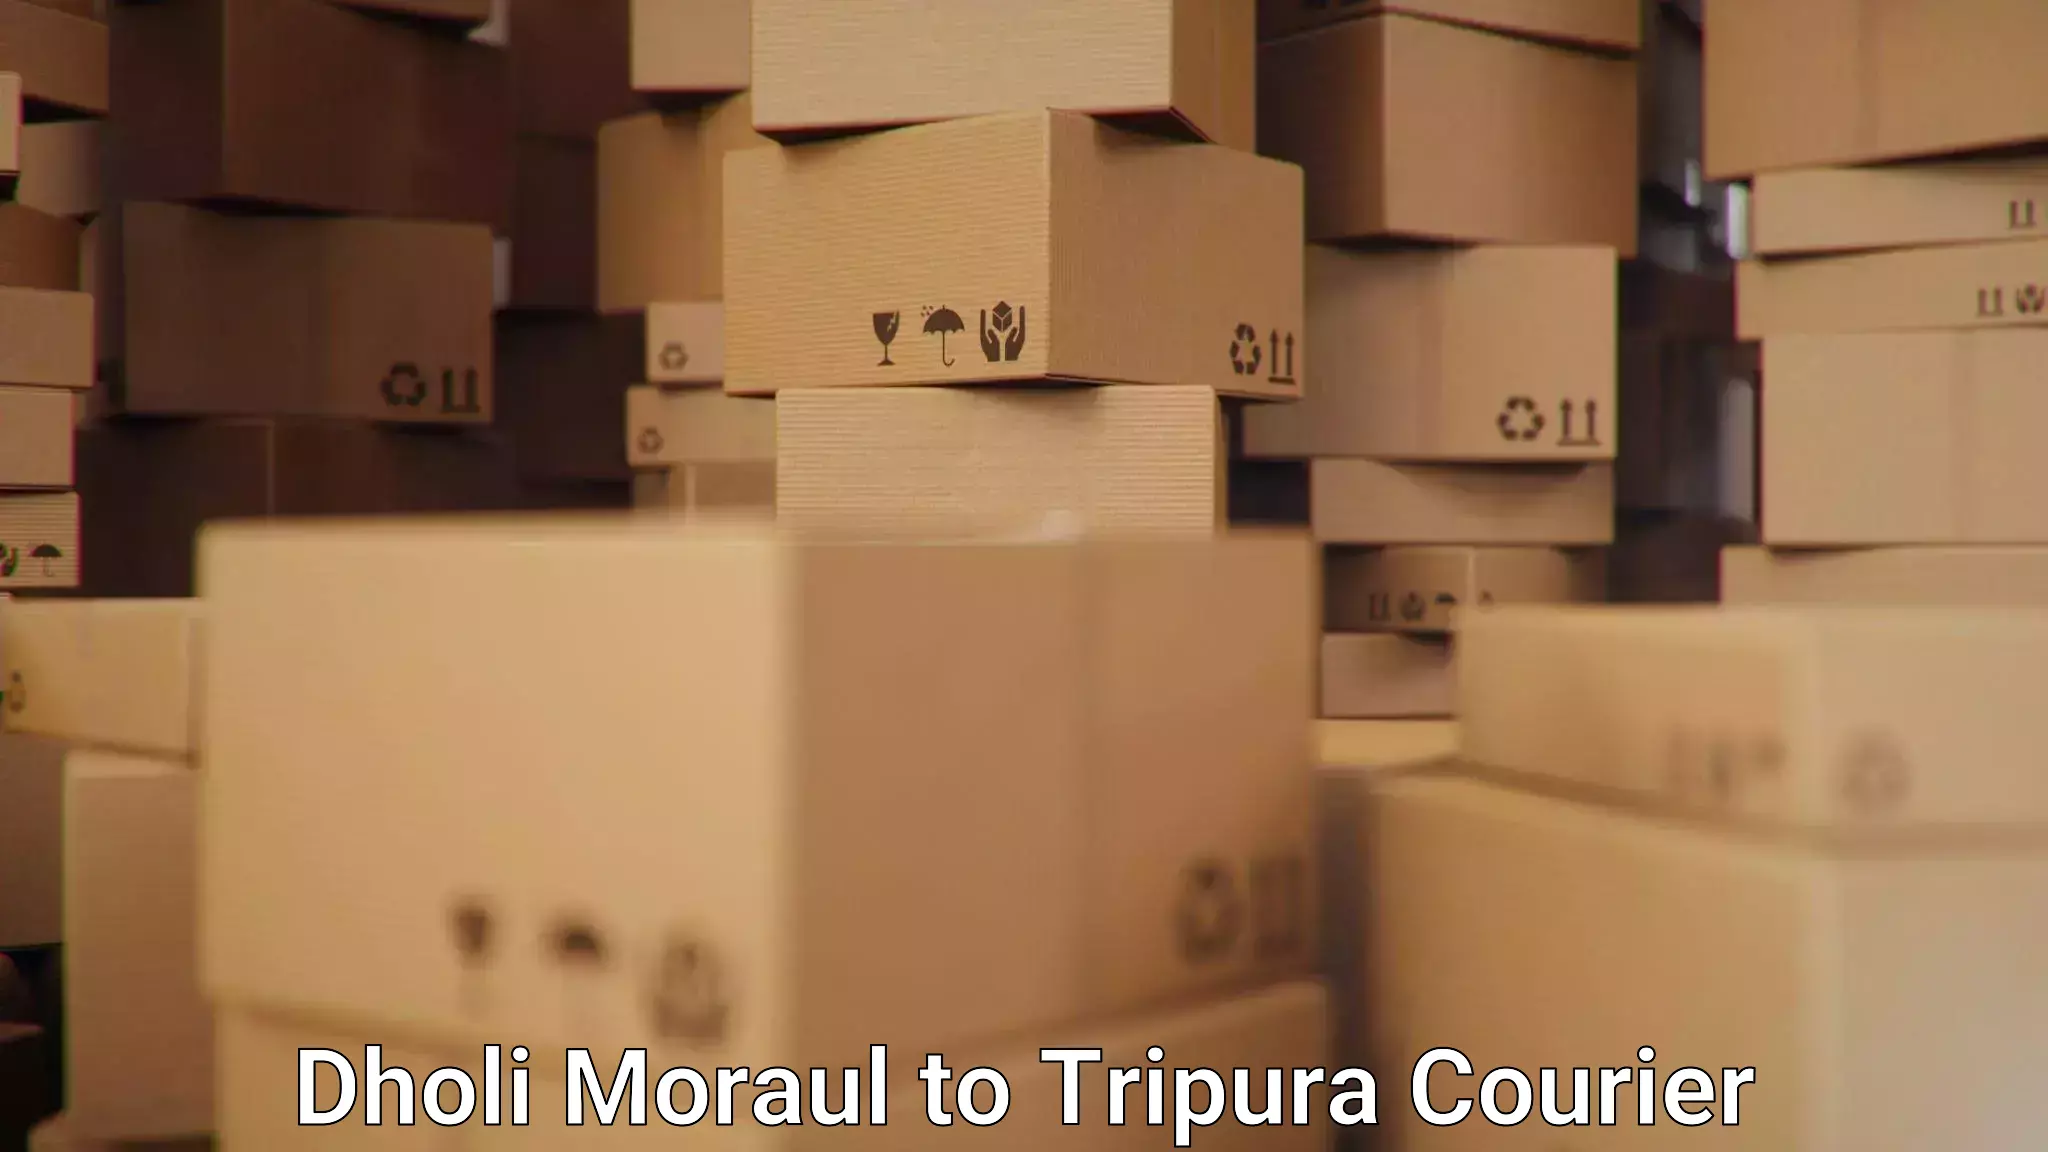 Professional courier services Dholi Moraul to Udaipur Tripura